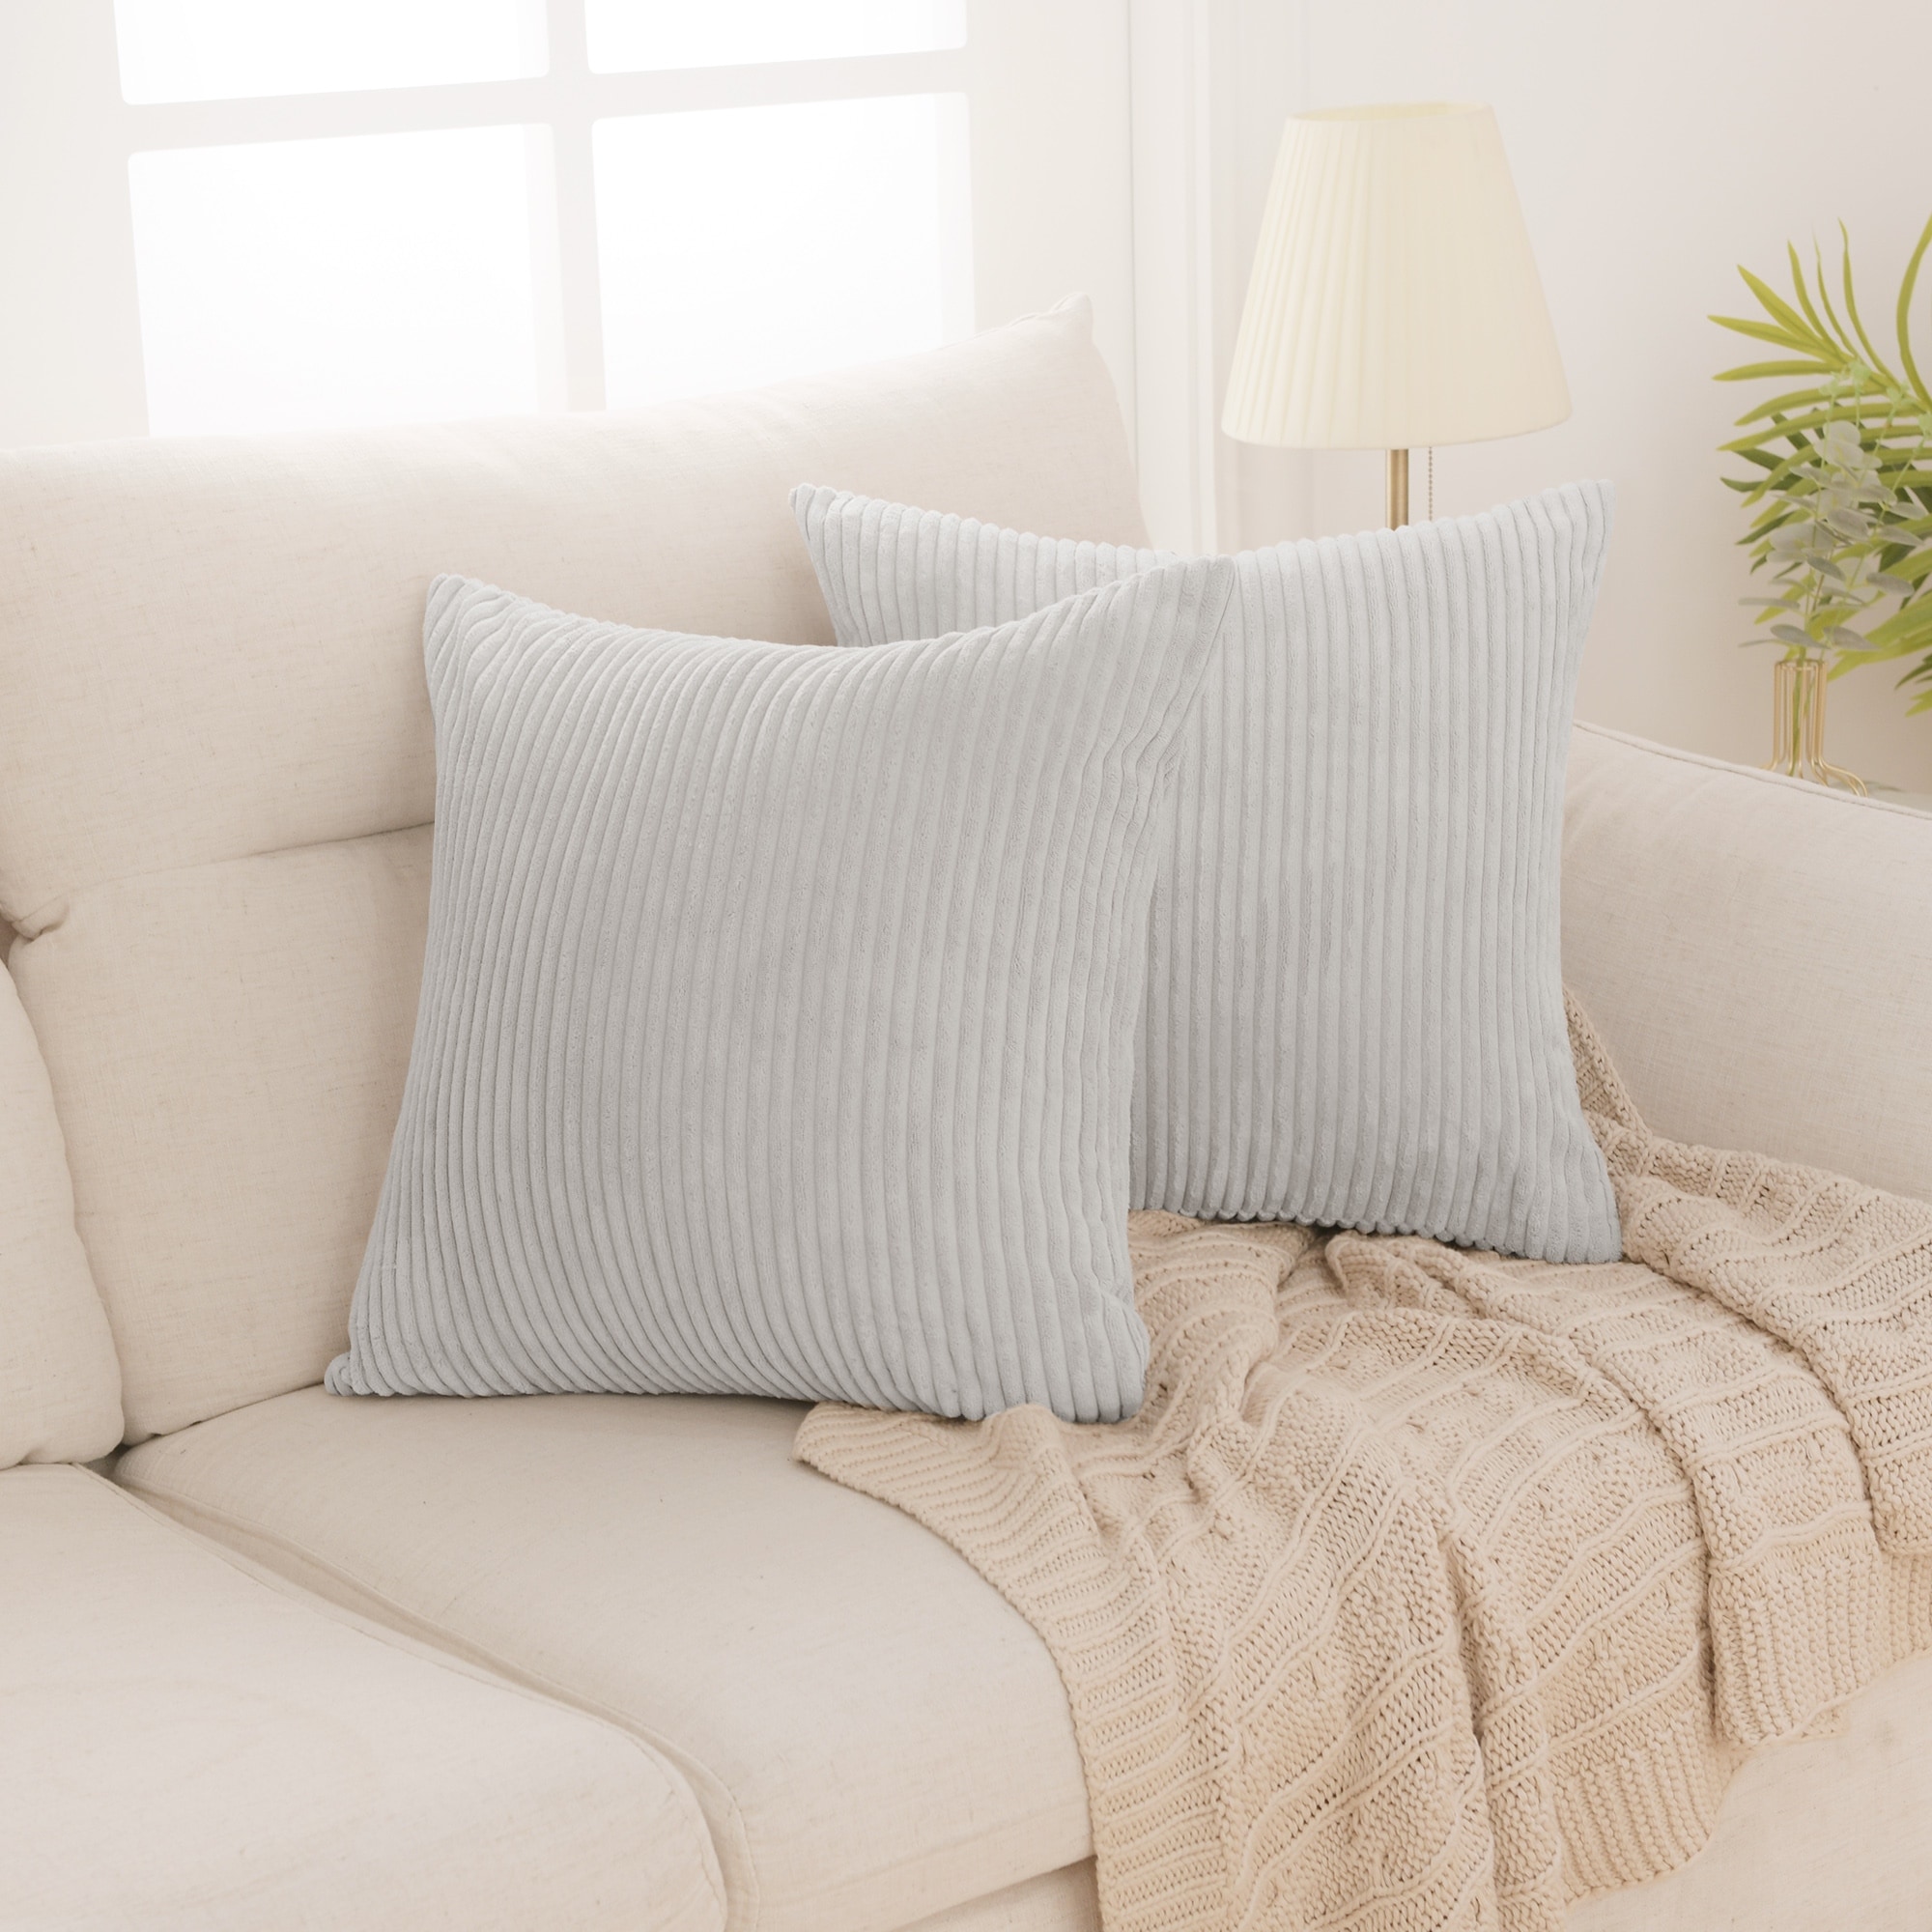 Deconovo Soft Corduroy Throw Pillow Covers 16x16 Inch 2 Pieces in Cream  White with Stripe Pattern Bundle with 2 Pack 18x18 Pillow Inserts for Couch